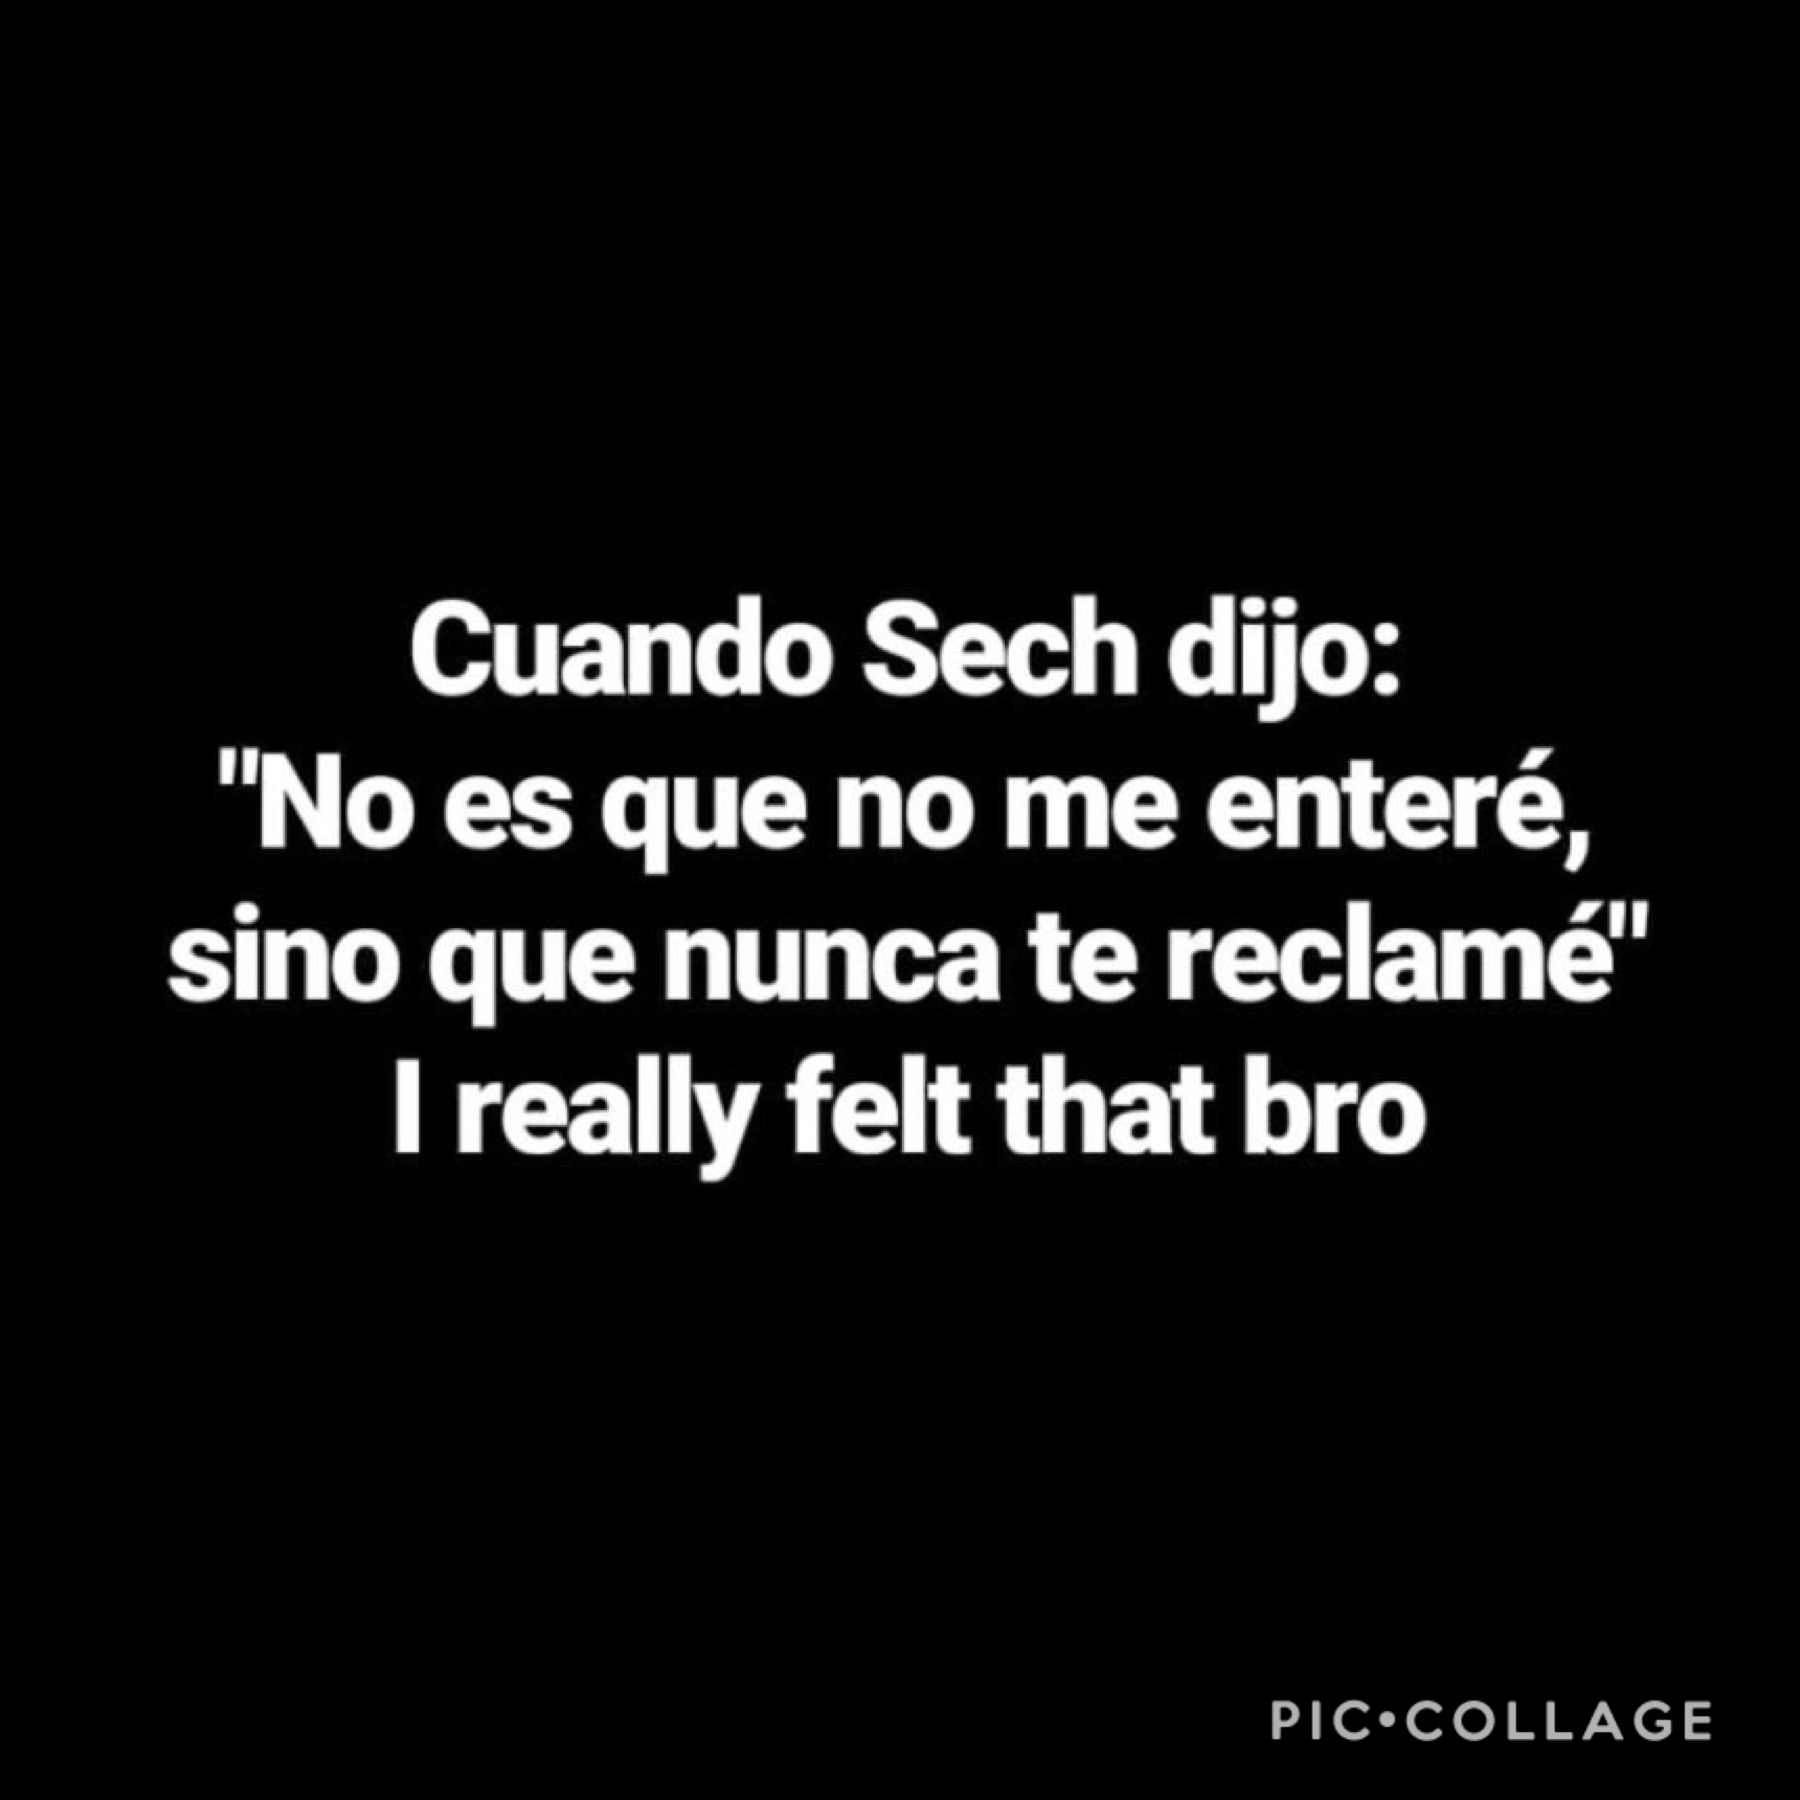 When Sech said: “It’s not that I didn’t find out, I just never called you out on it” —I- 😫🙏🏽💘😂 (Also if you’ve never heard Sech’s music I highly rec “Otro Trago” 😌😉 AlsOooO: he’s Panamanian, like yours truly 🤩🇵🇦)